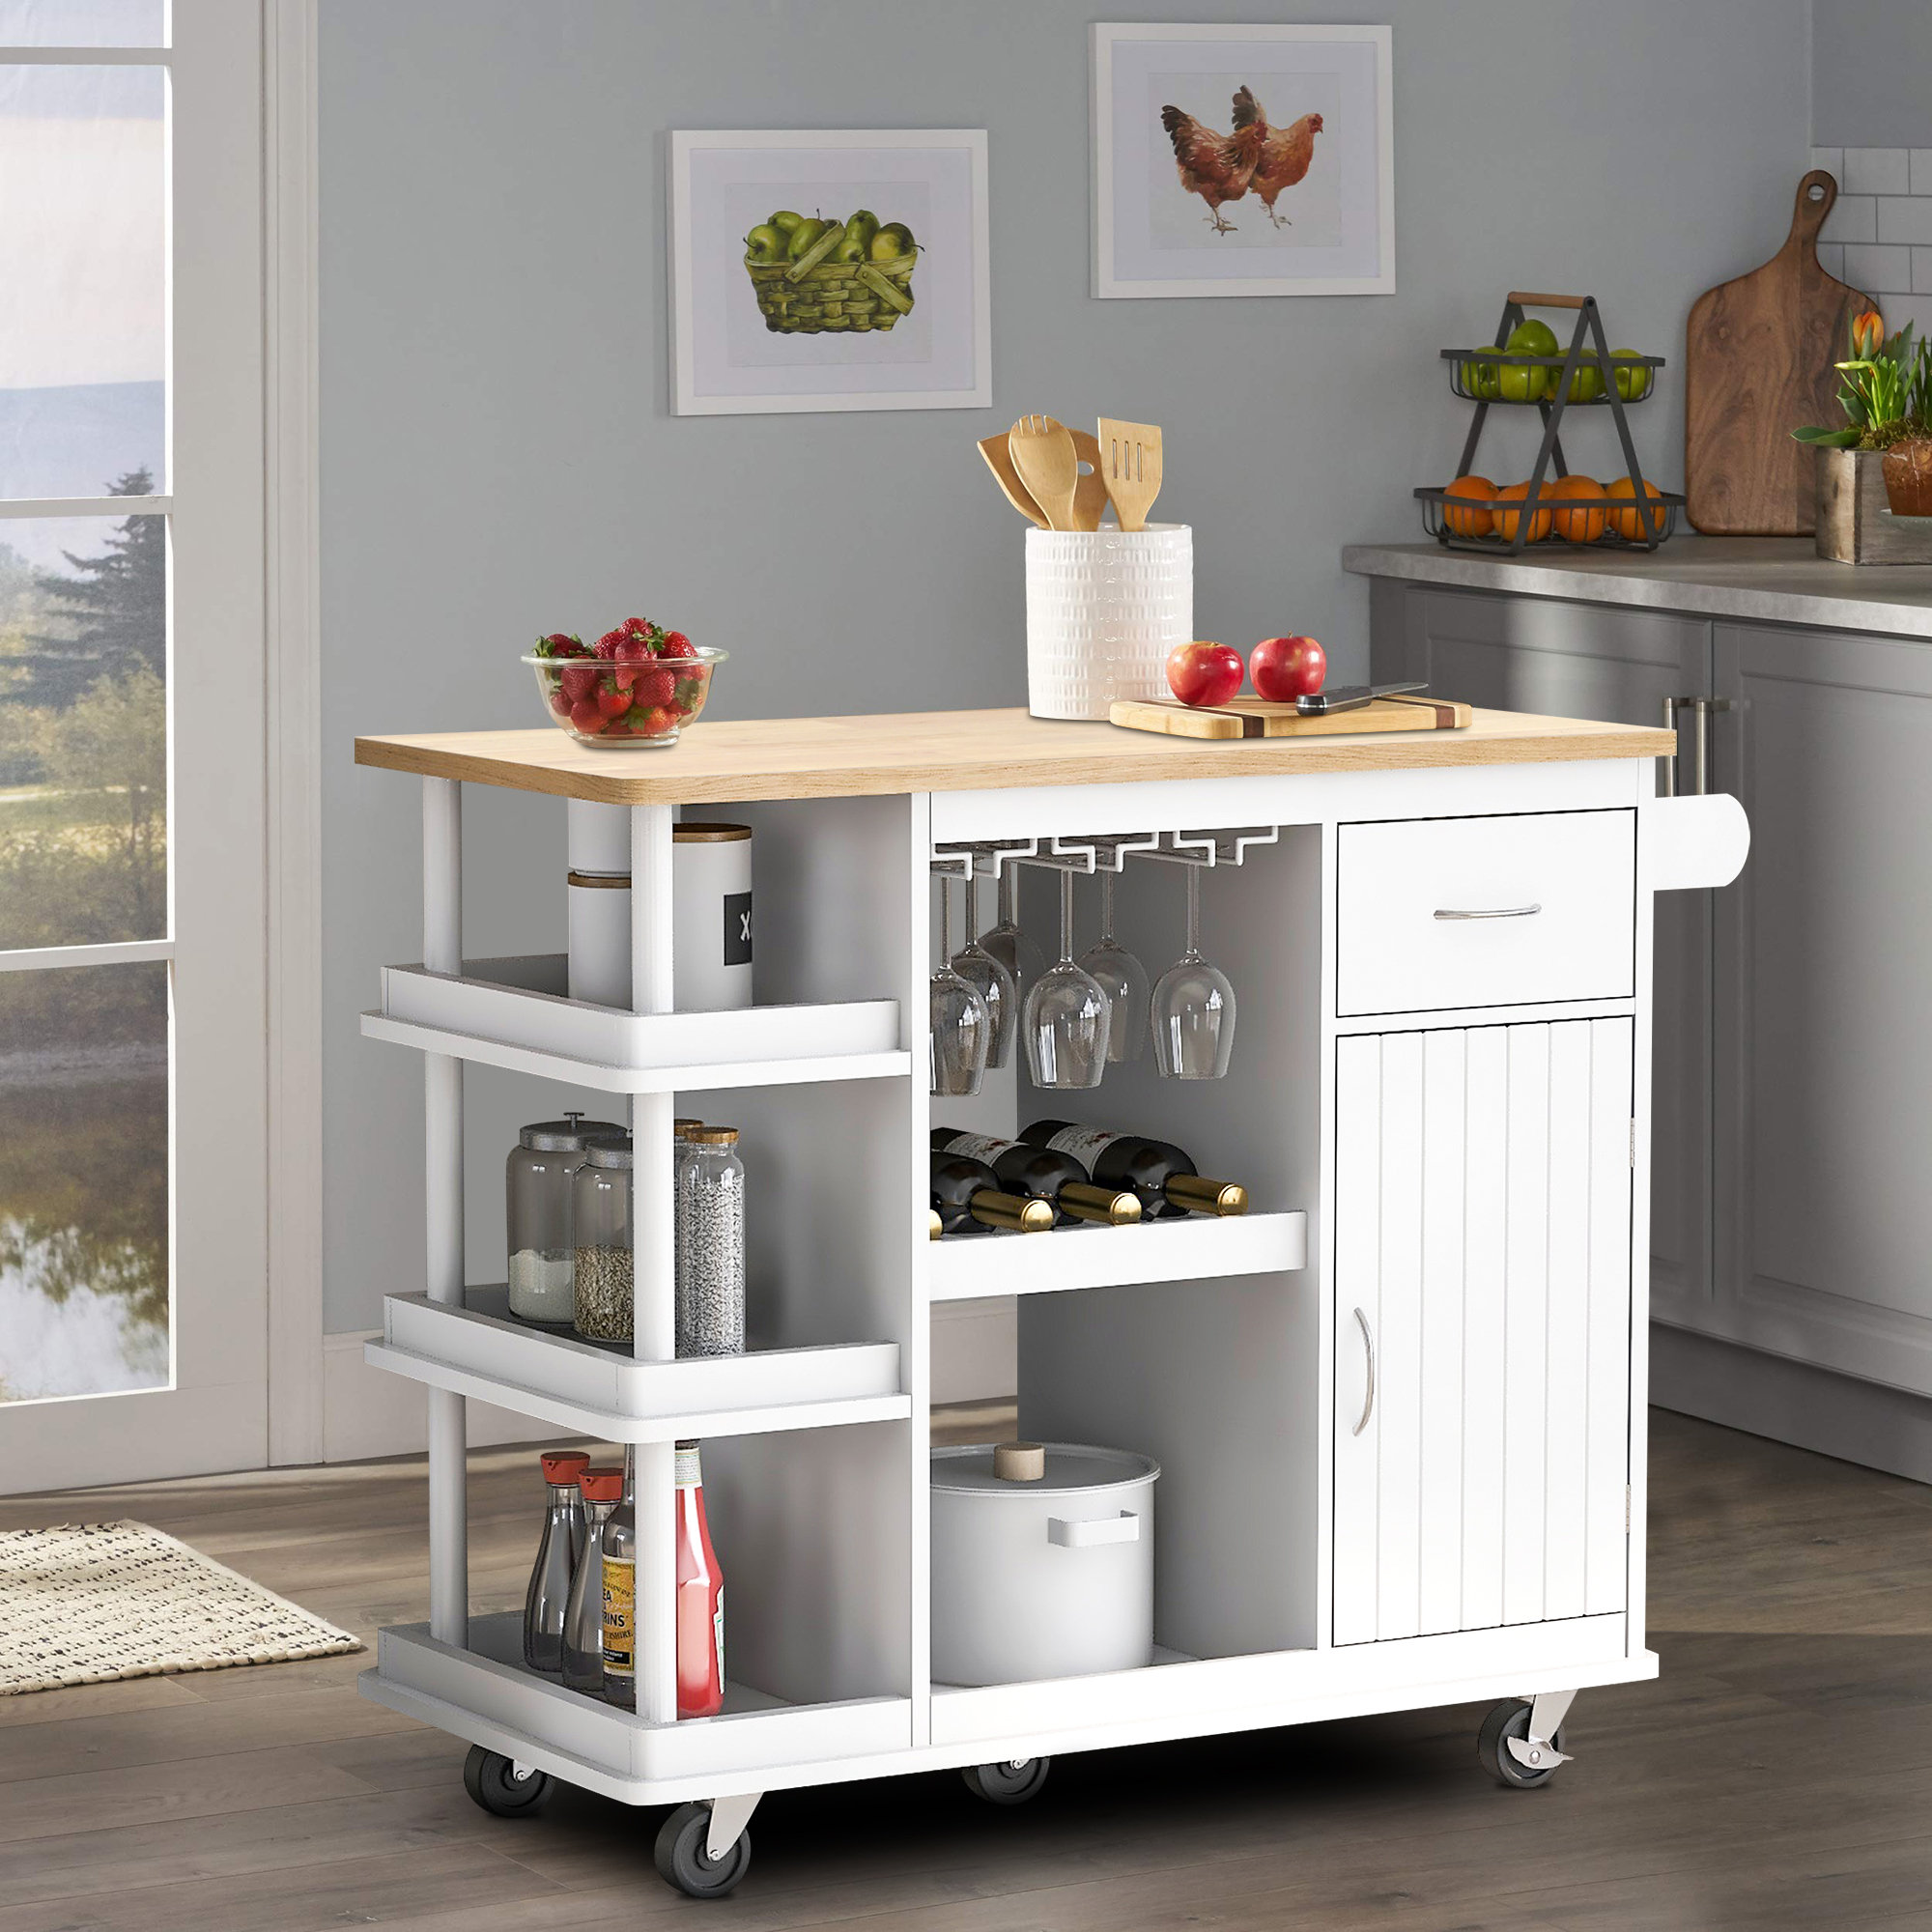 Kitchen Islands with Storage, Kitchen Carts and Islands Rolling Kitchen Island Storage Cabinets on Wheels with Drawers, Towel Rack and Shelves in